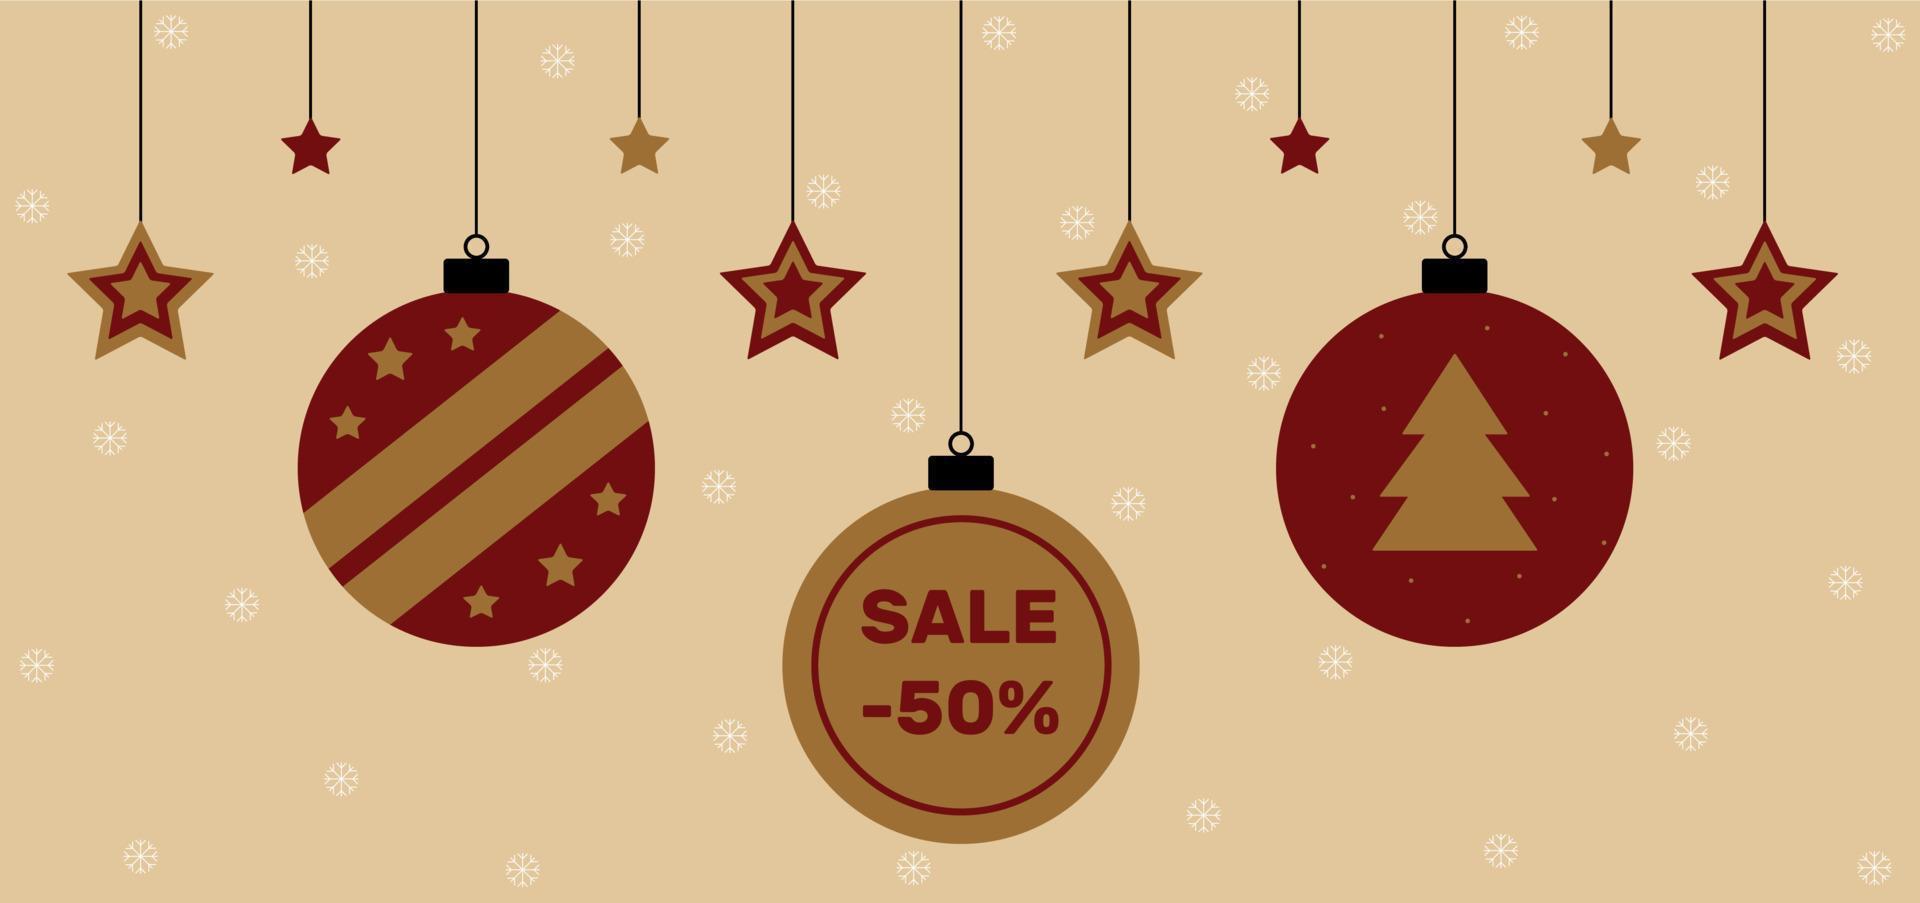 Christmas and New Year sale banner. Christmas balls and stars in gold and dark red colours on light golden background with snowflakes. Discount poster. Special offer. Vector illustration.